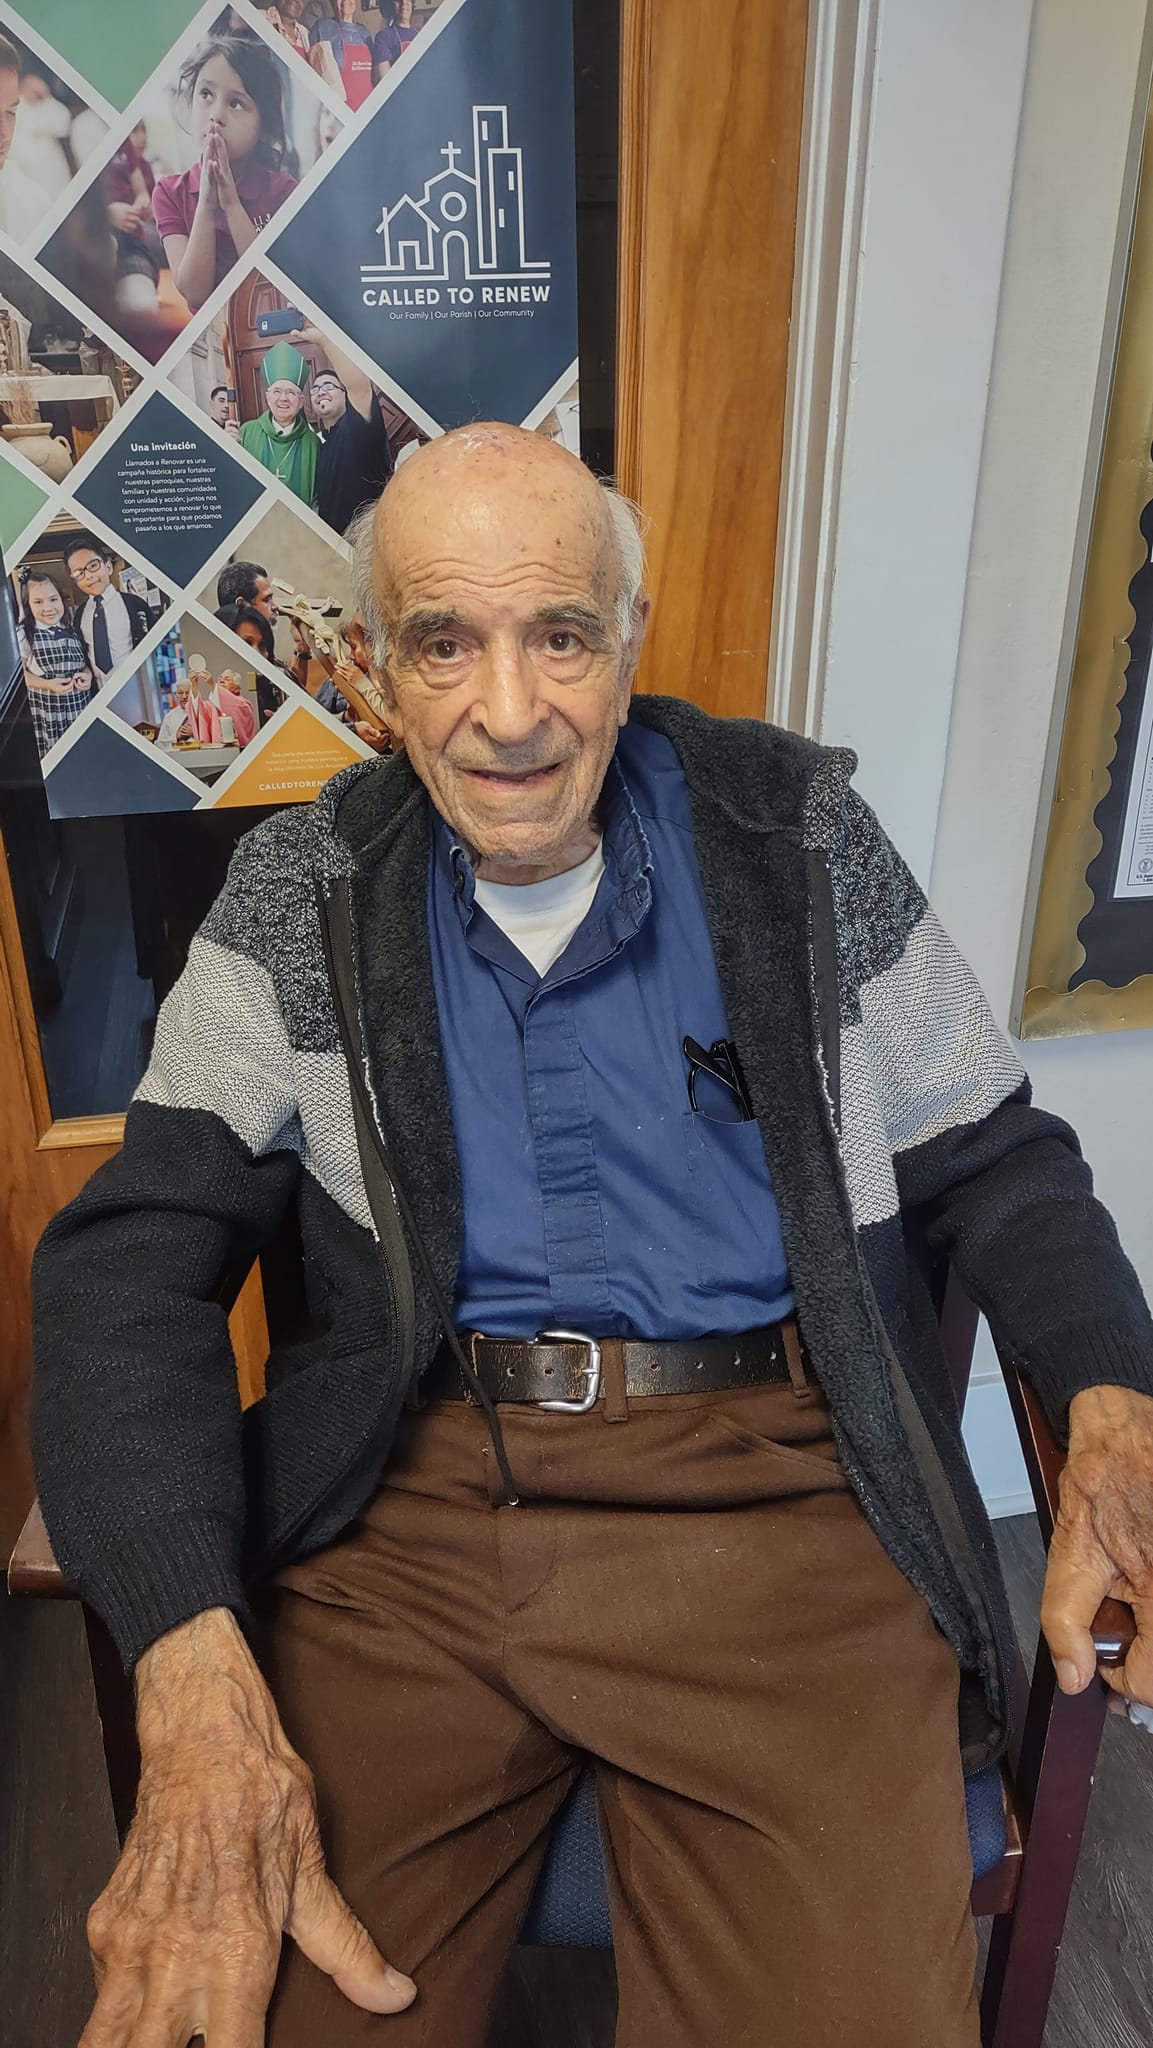 Fr Xavier Colleoni smiles for the camera. He is older now, but still looking great for 95-years old.